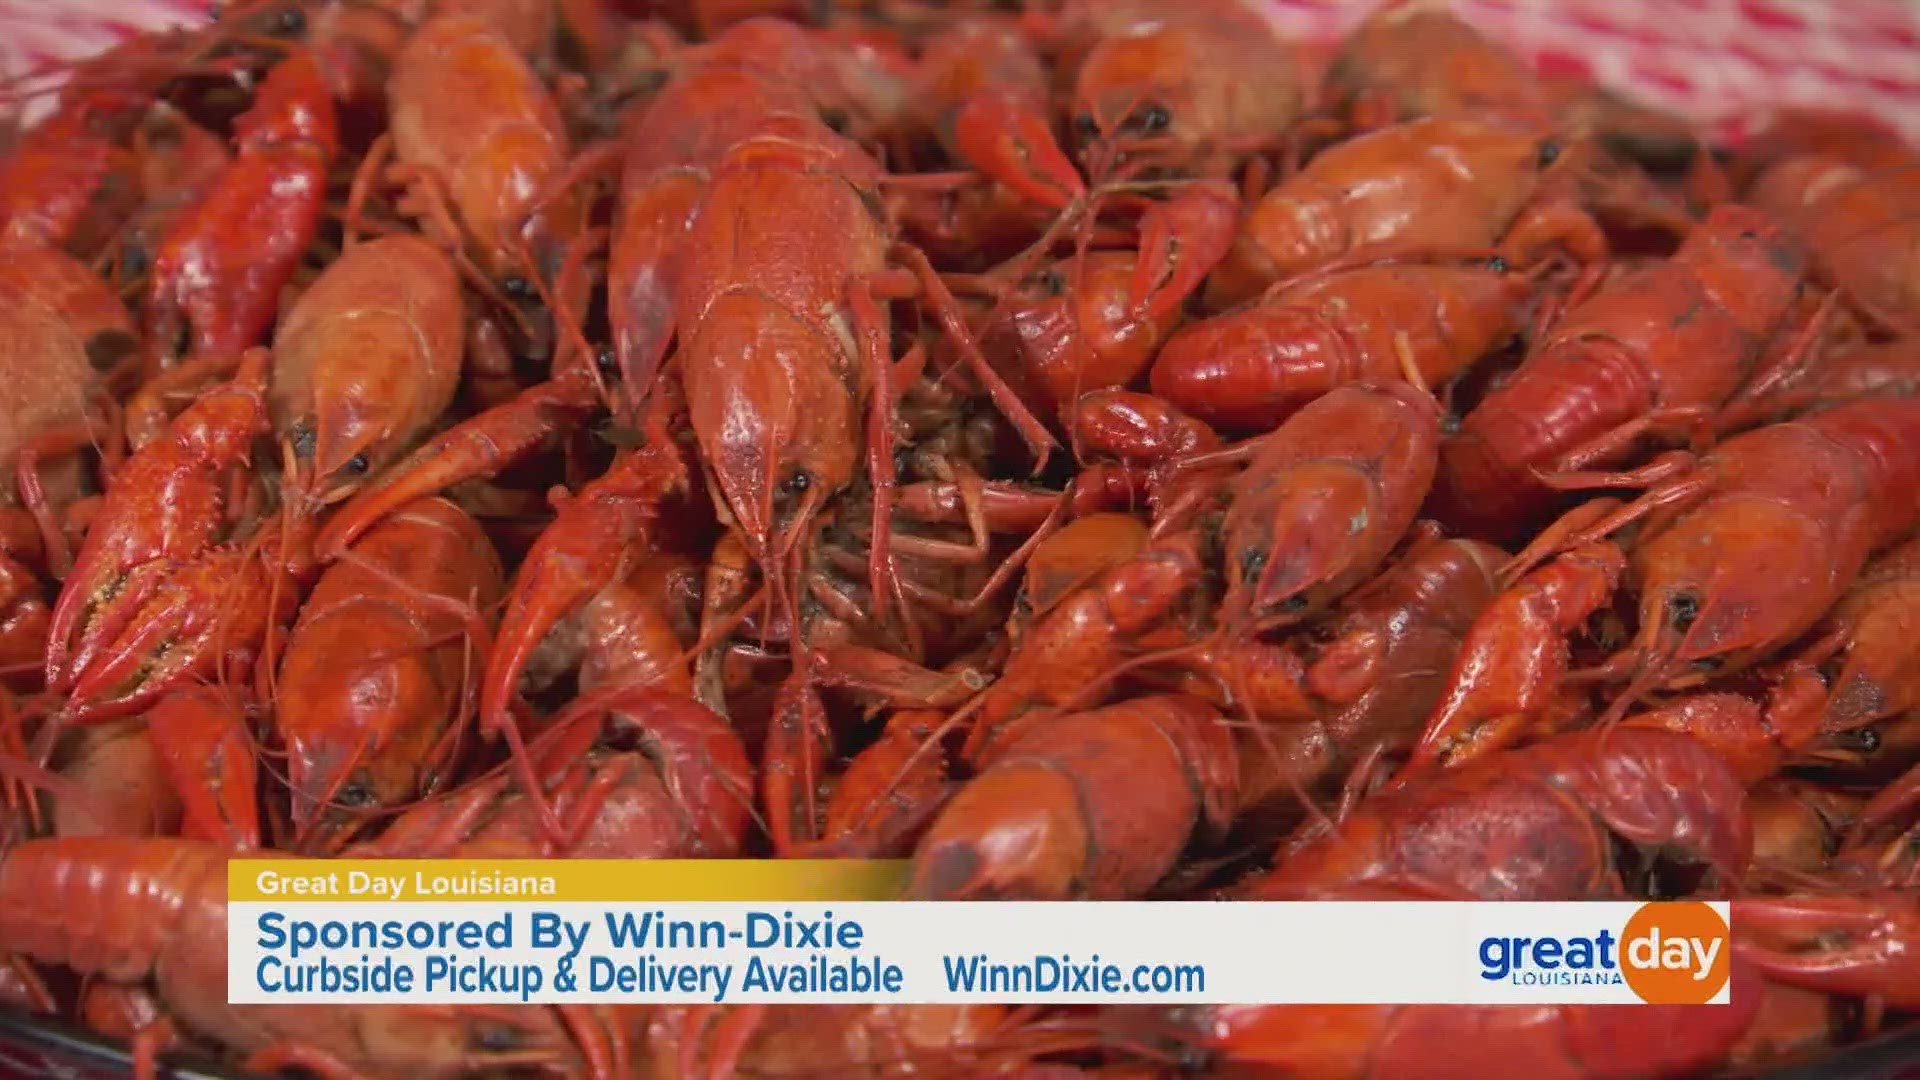 Winn-Dixie delivers the high-quality products our customers want, including fresh and
locally sourced seafood.